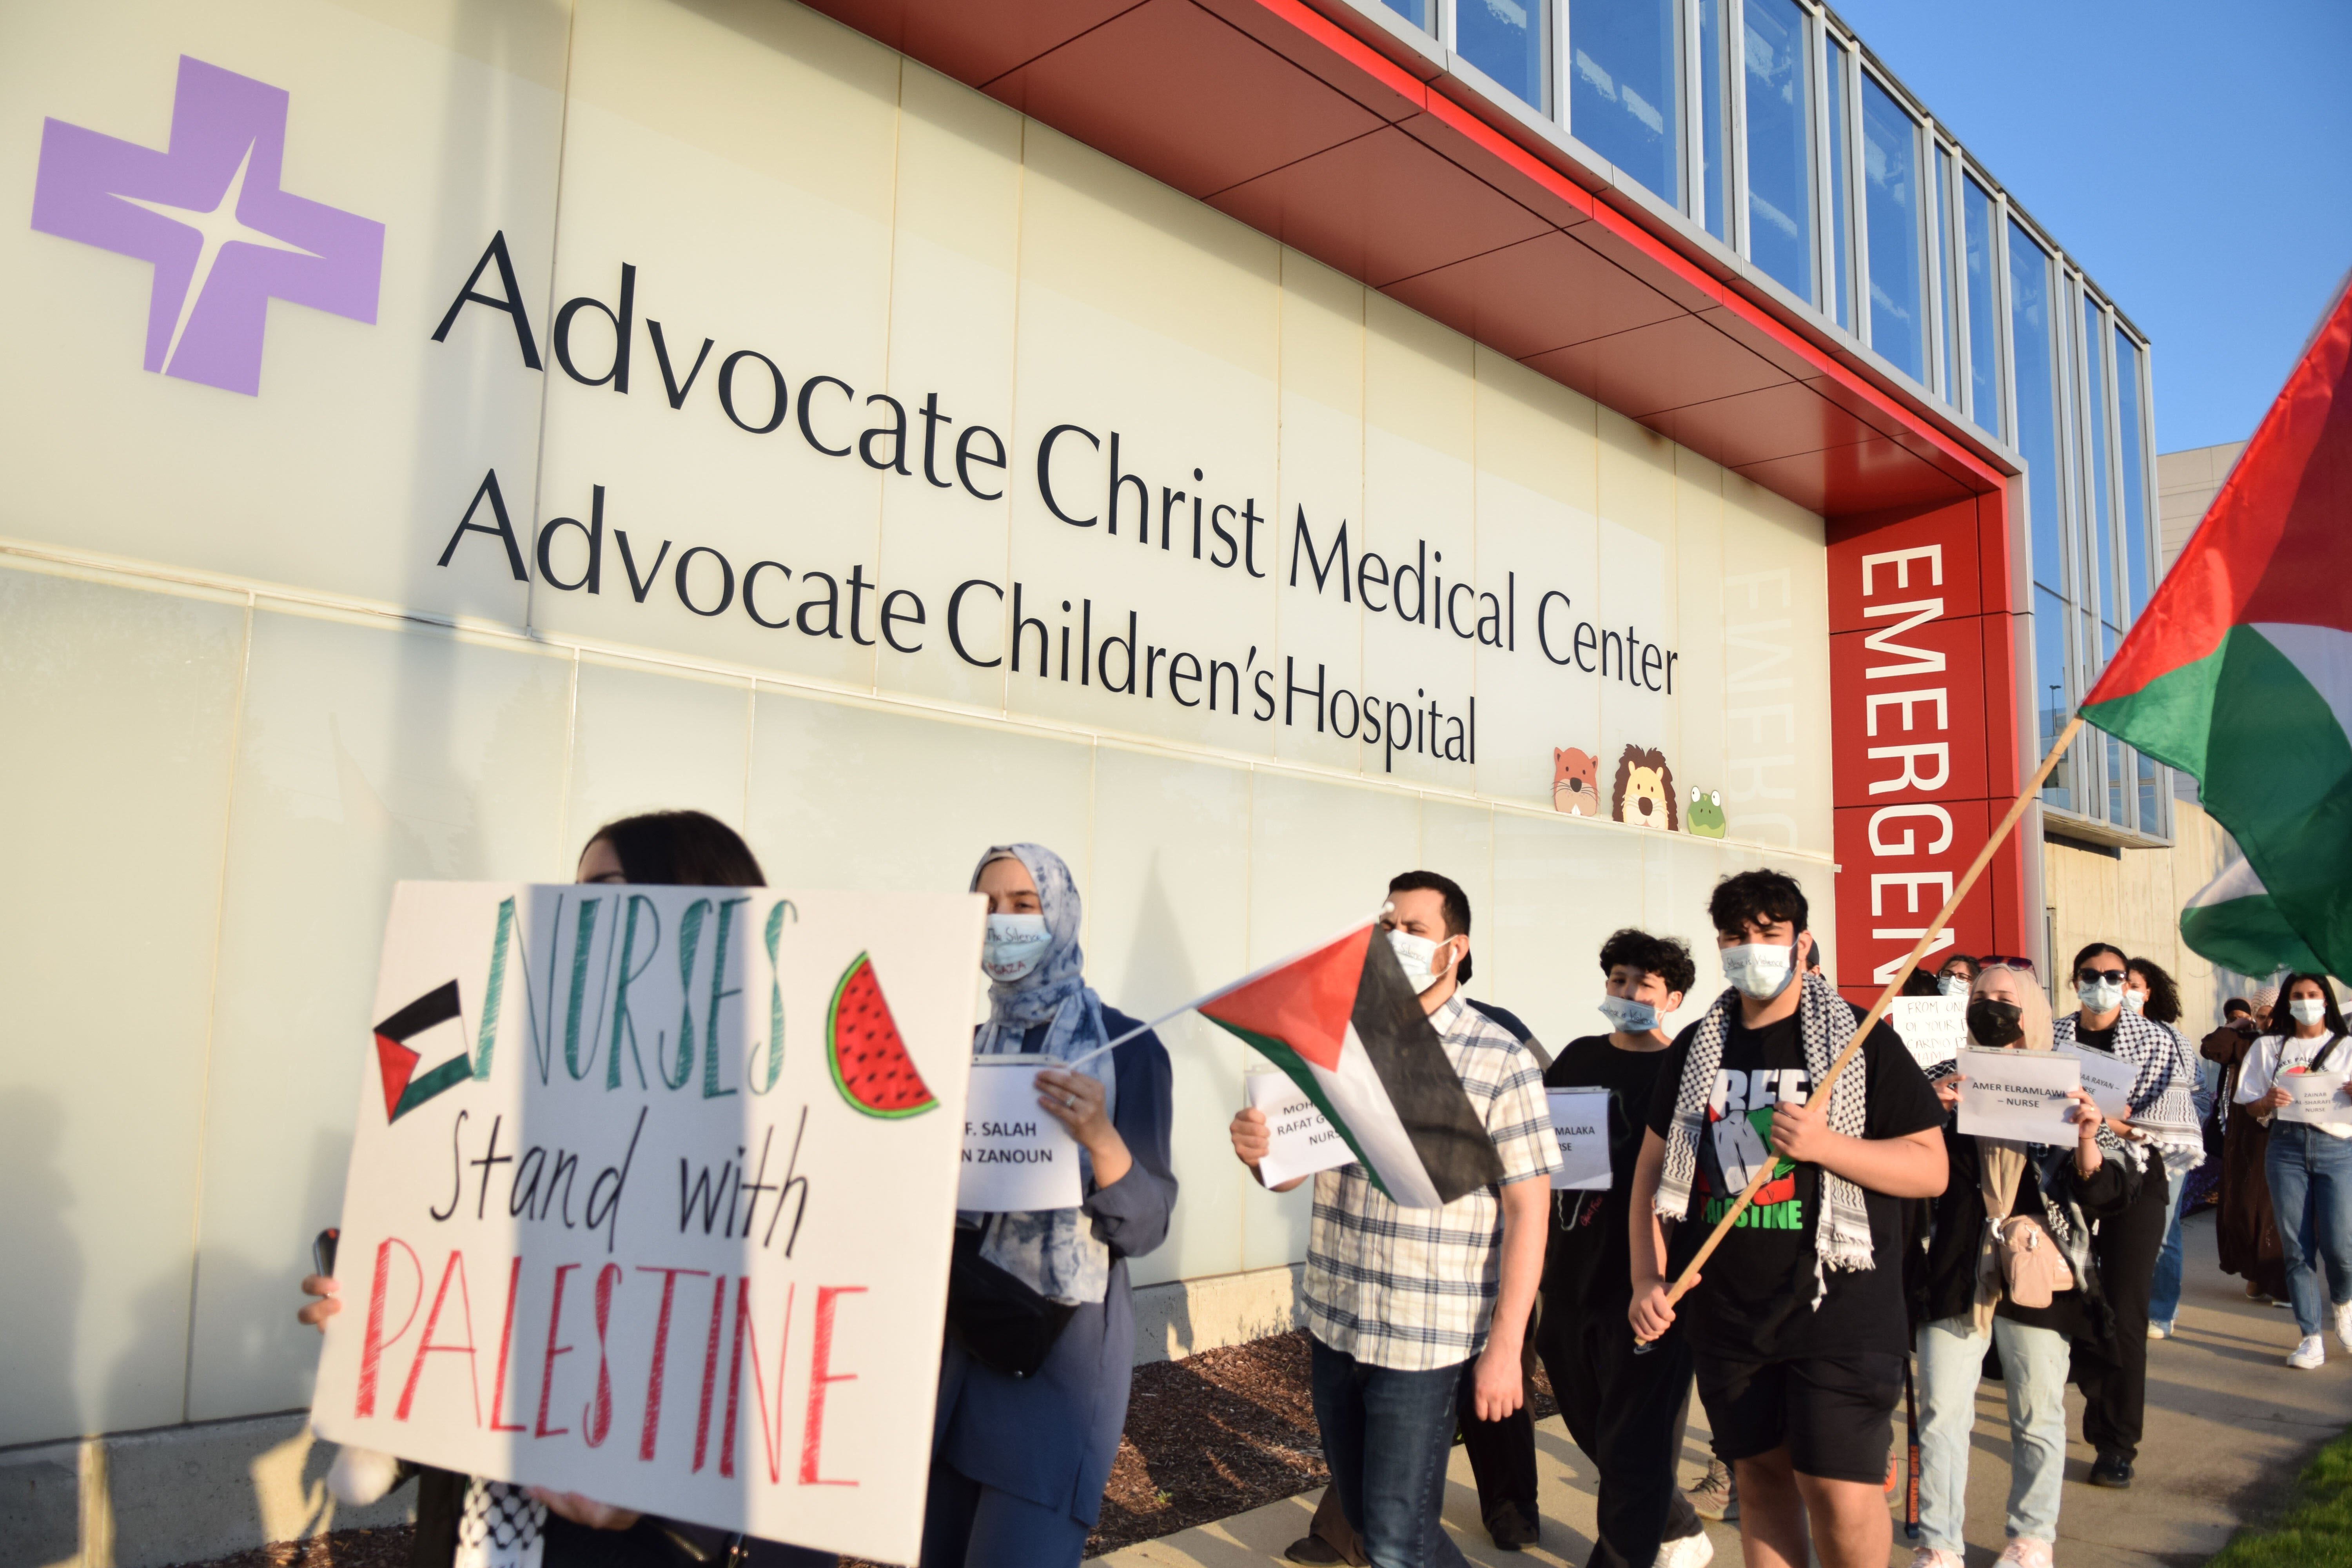 Advocate Health staff stage protest, allege disparities and discrimination in response to Gaza crises